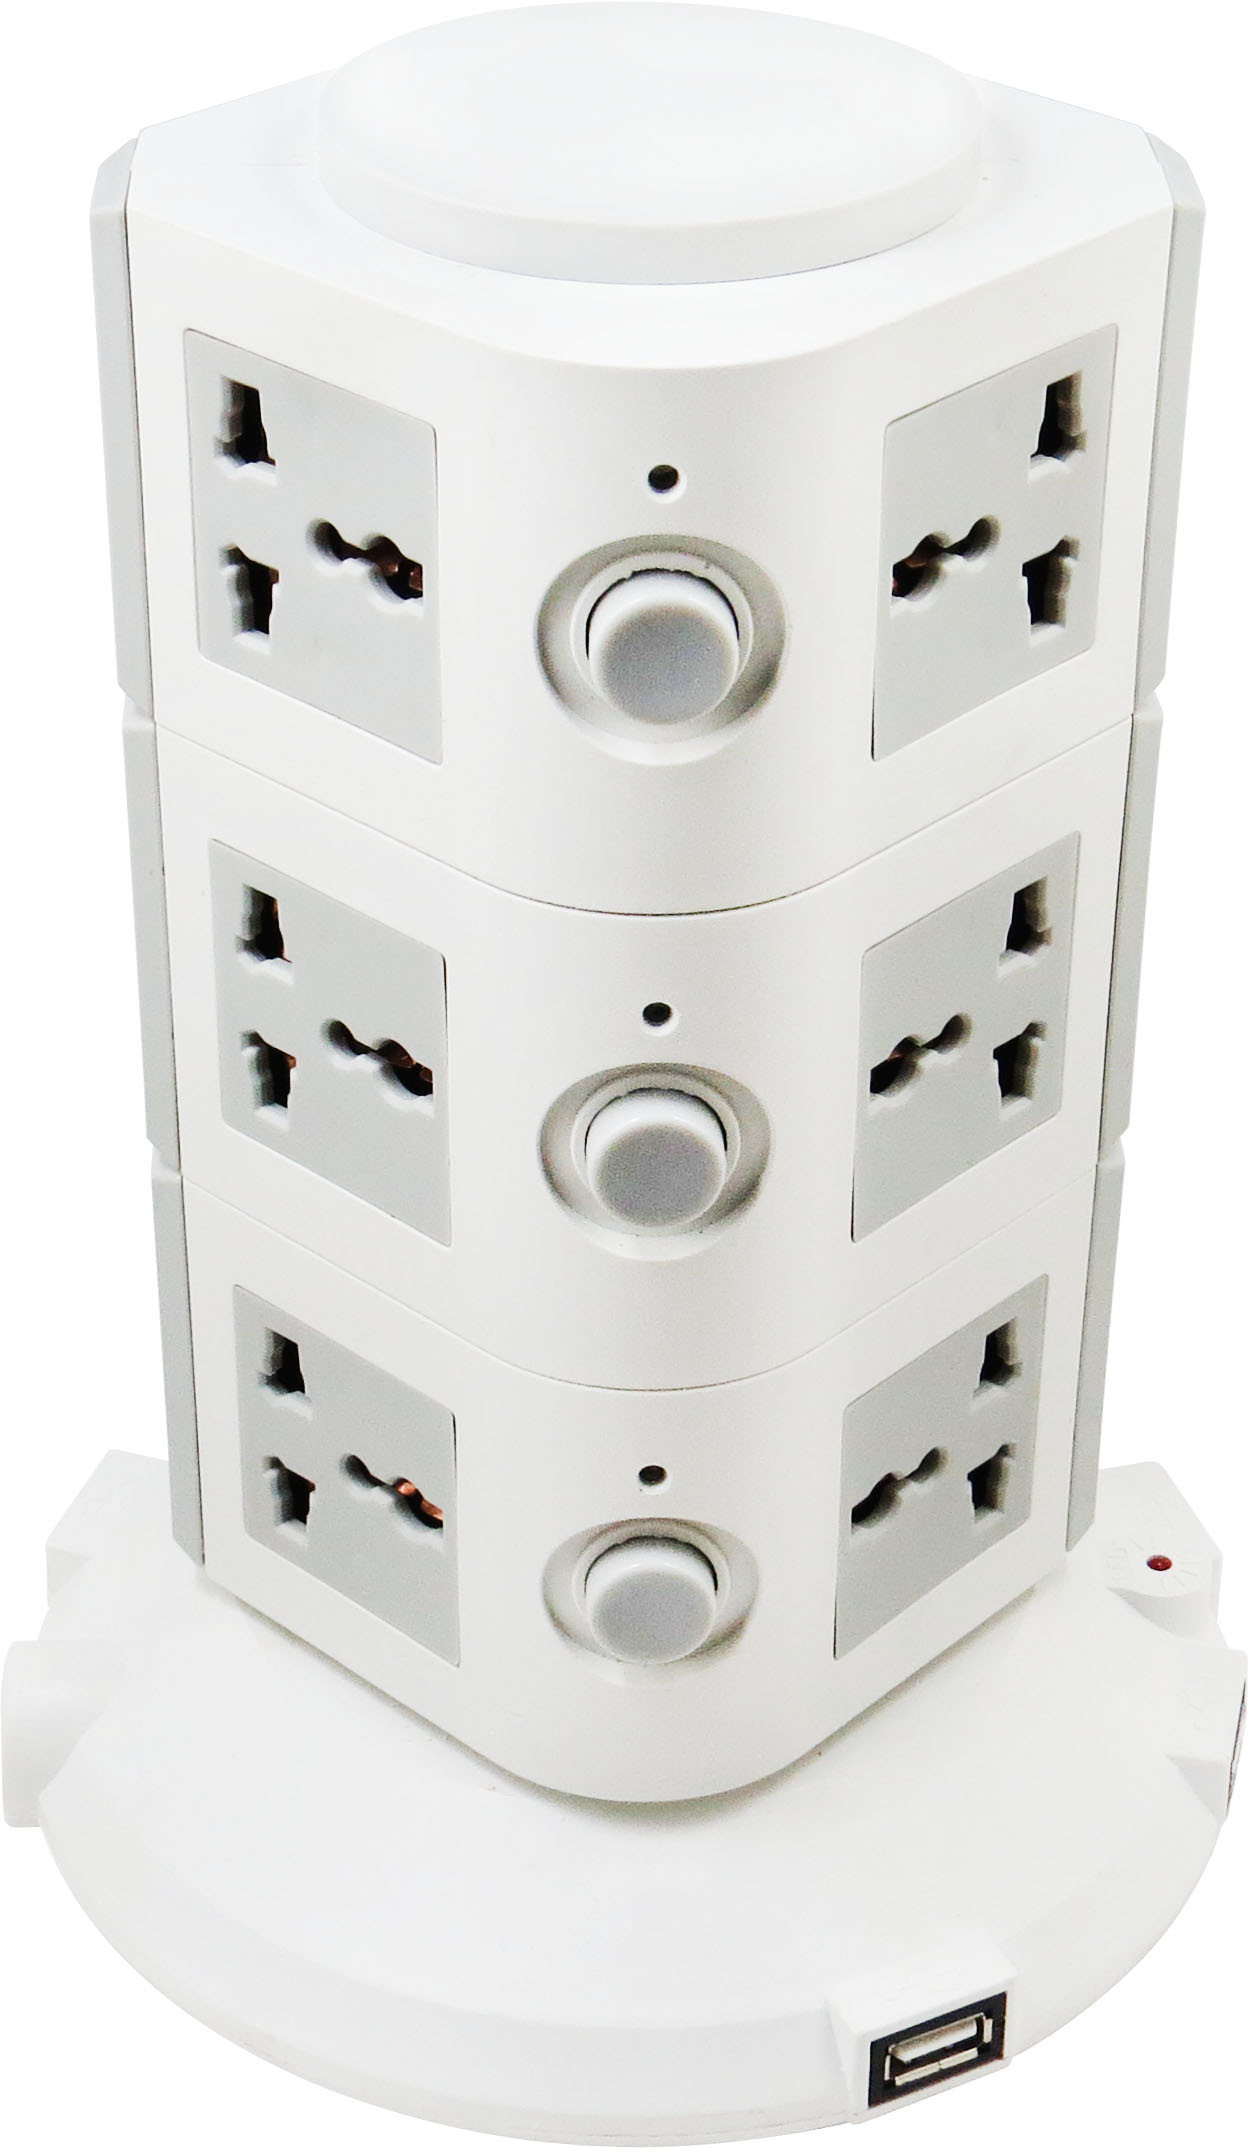 16PCS Socket American/Europe Plug Outlets with 5 USB Charger